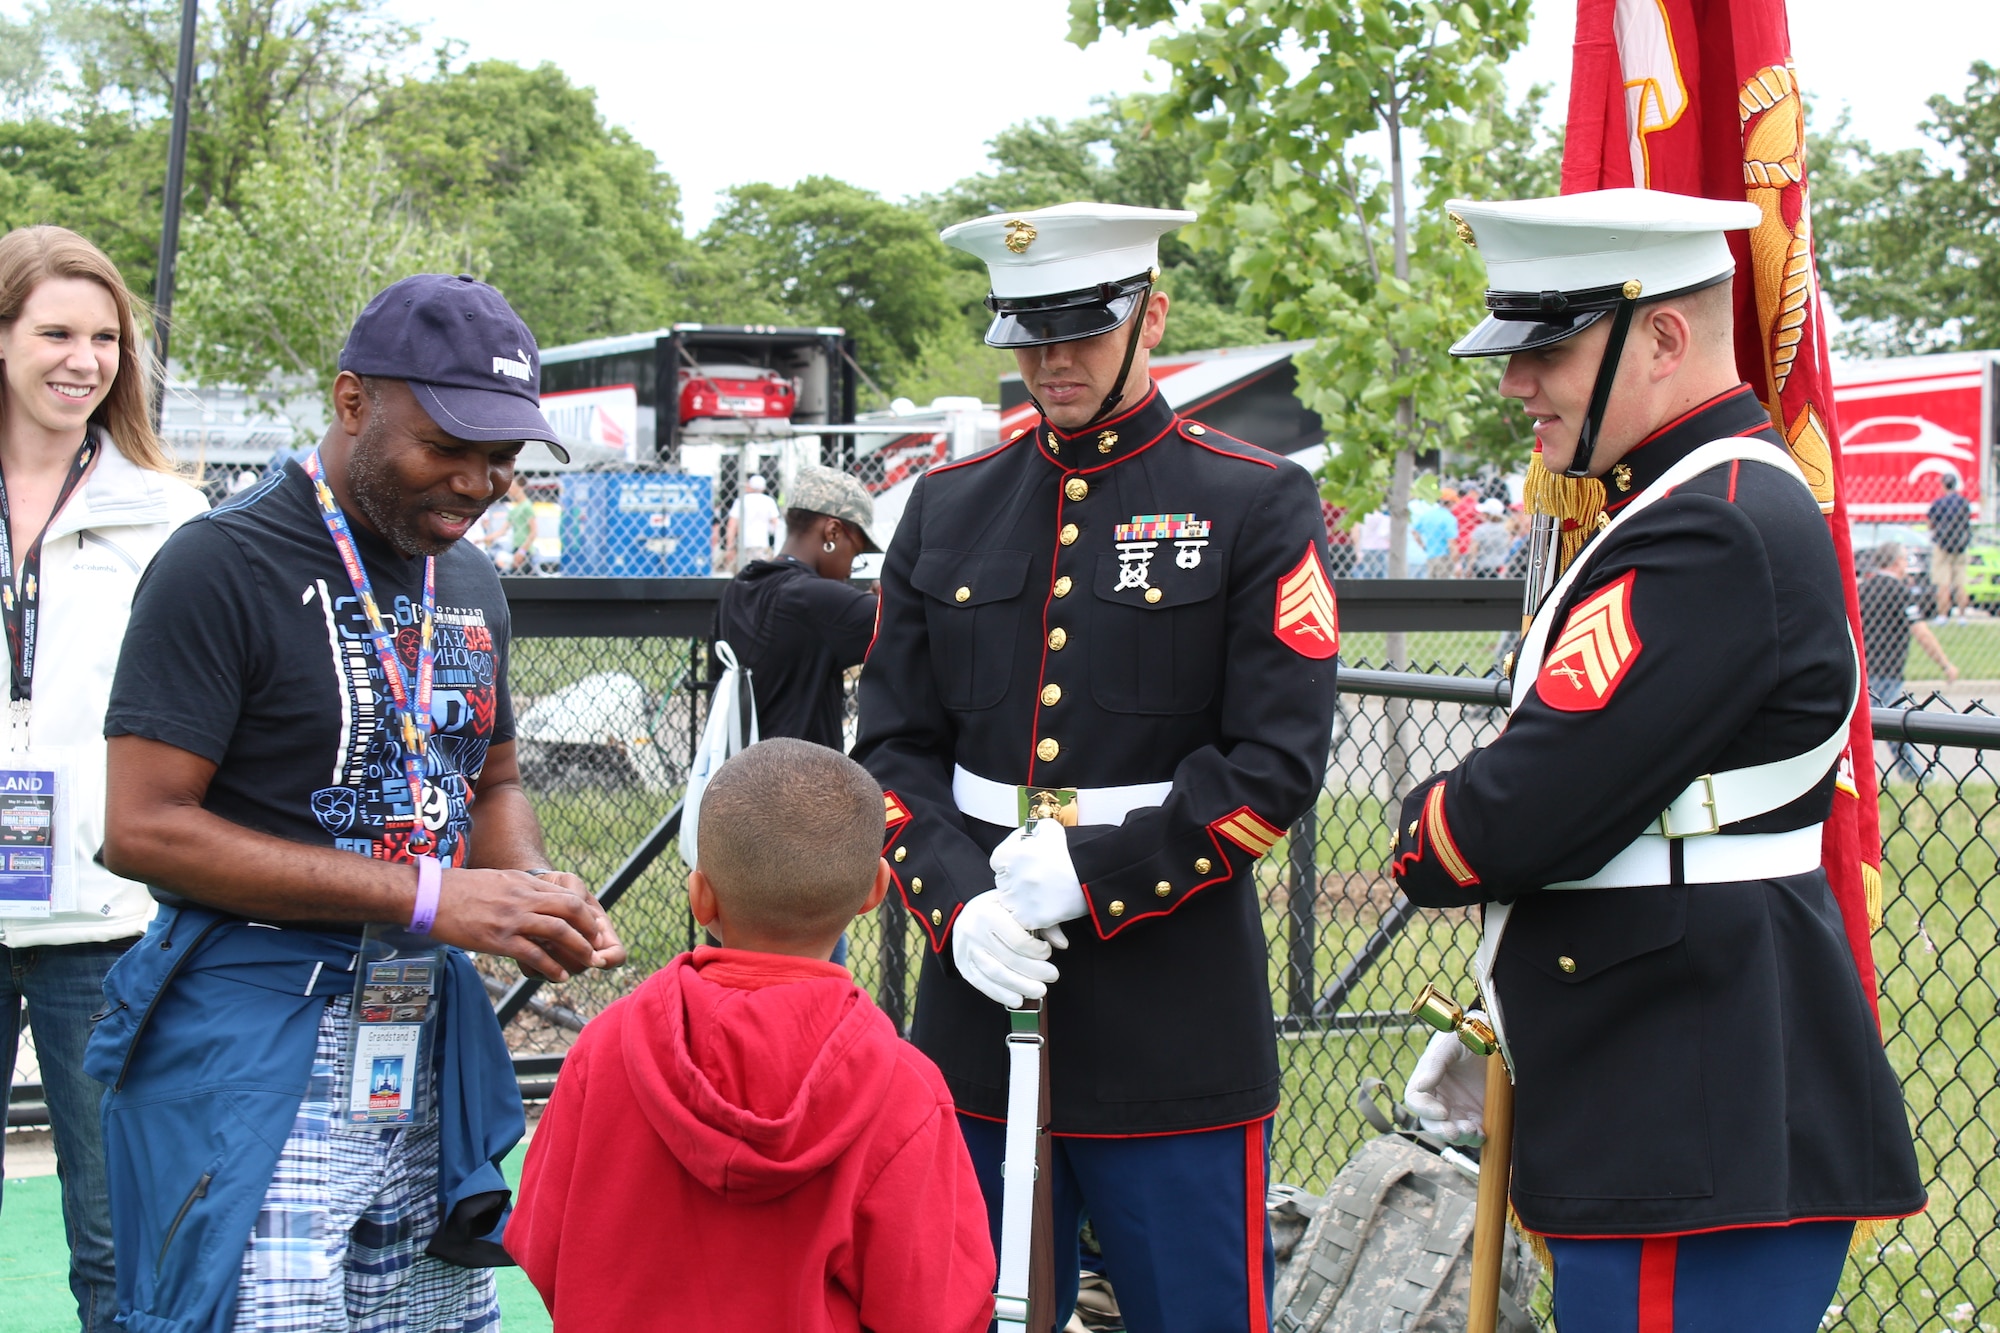 130601-Z-NV943-120: Marines from Selfridge Air National Guard Base, Mich., talk to a young fan before presenting the colors during pre-race festivities on June 2, 2013, during the 2013 Chevrolet Detroit Belle Isle Grand Prix. More than 50 military members from the various branches and units at Selfridge took part in five volunteer events over the race weekend. Grand Prix officials invited the military members to participate in the events to show their appreciation for their service. (U.S. Air National Guard photo by Angela Pope/Released)